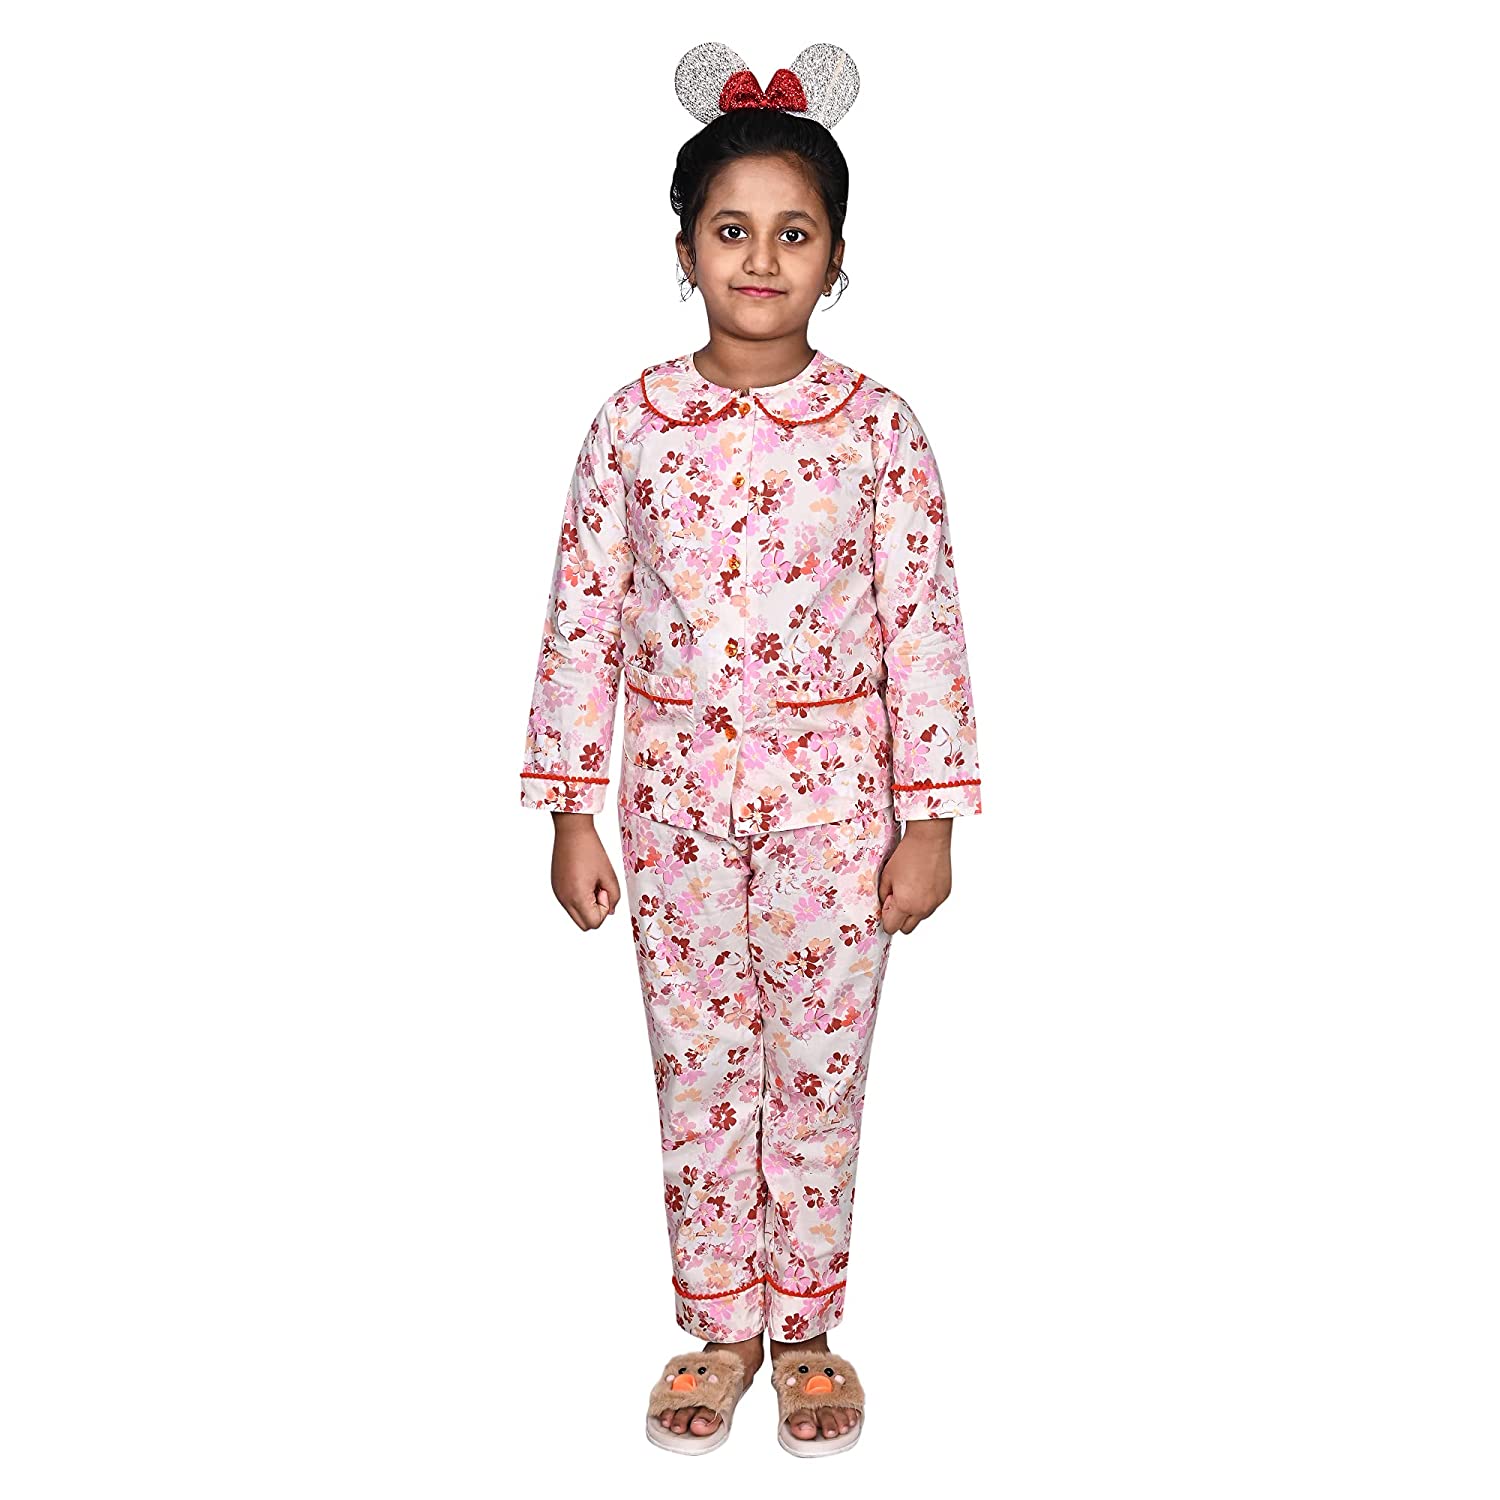 Nightsuit for Women Comfy Pajama Set Sleeping Suit Floral Hand - Etsy